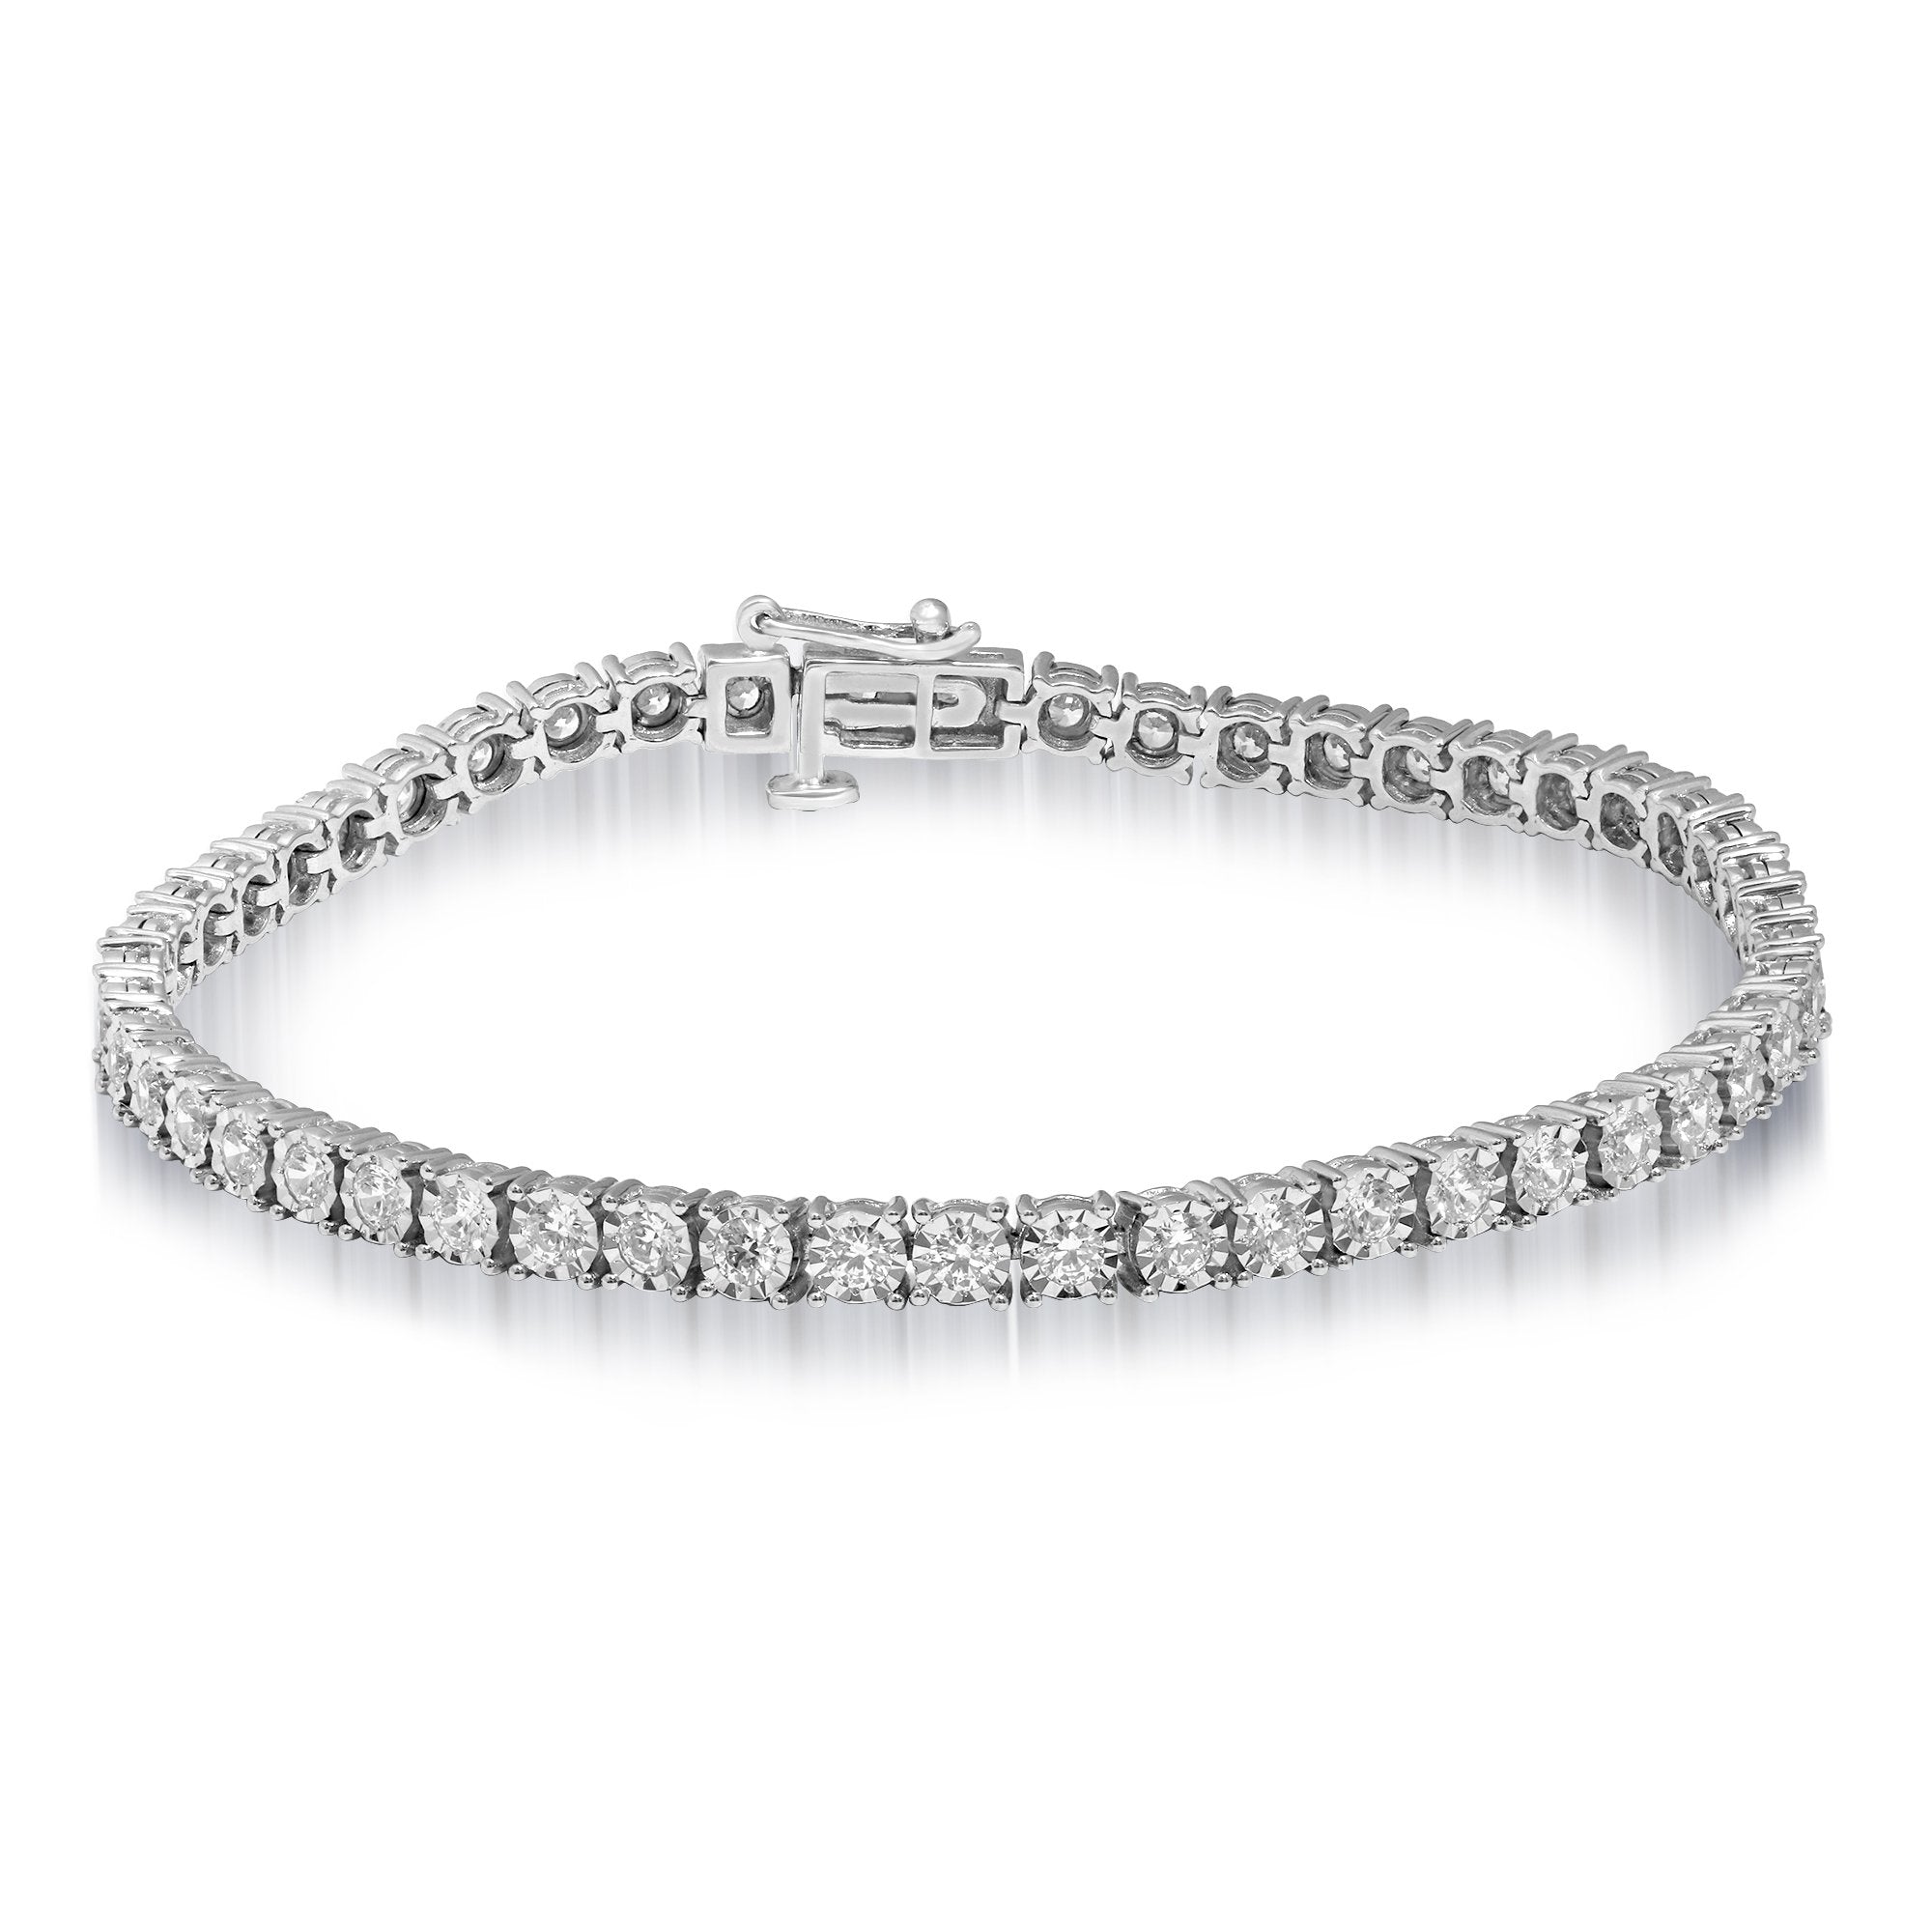 Meera Tennis Bracelet with 3.00ct of Laboratory Grown Diamonds in 9ct White Gold Bracelets Bevilles 